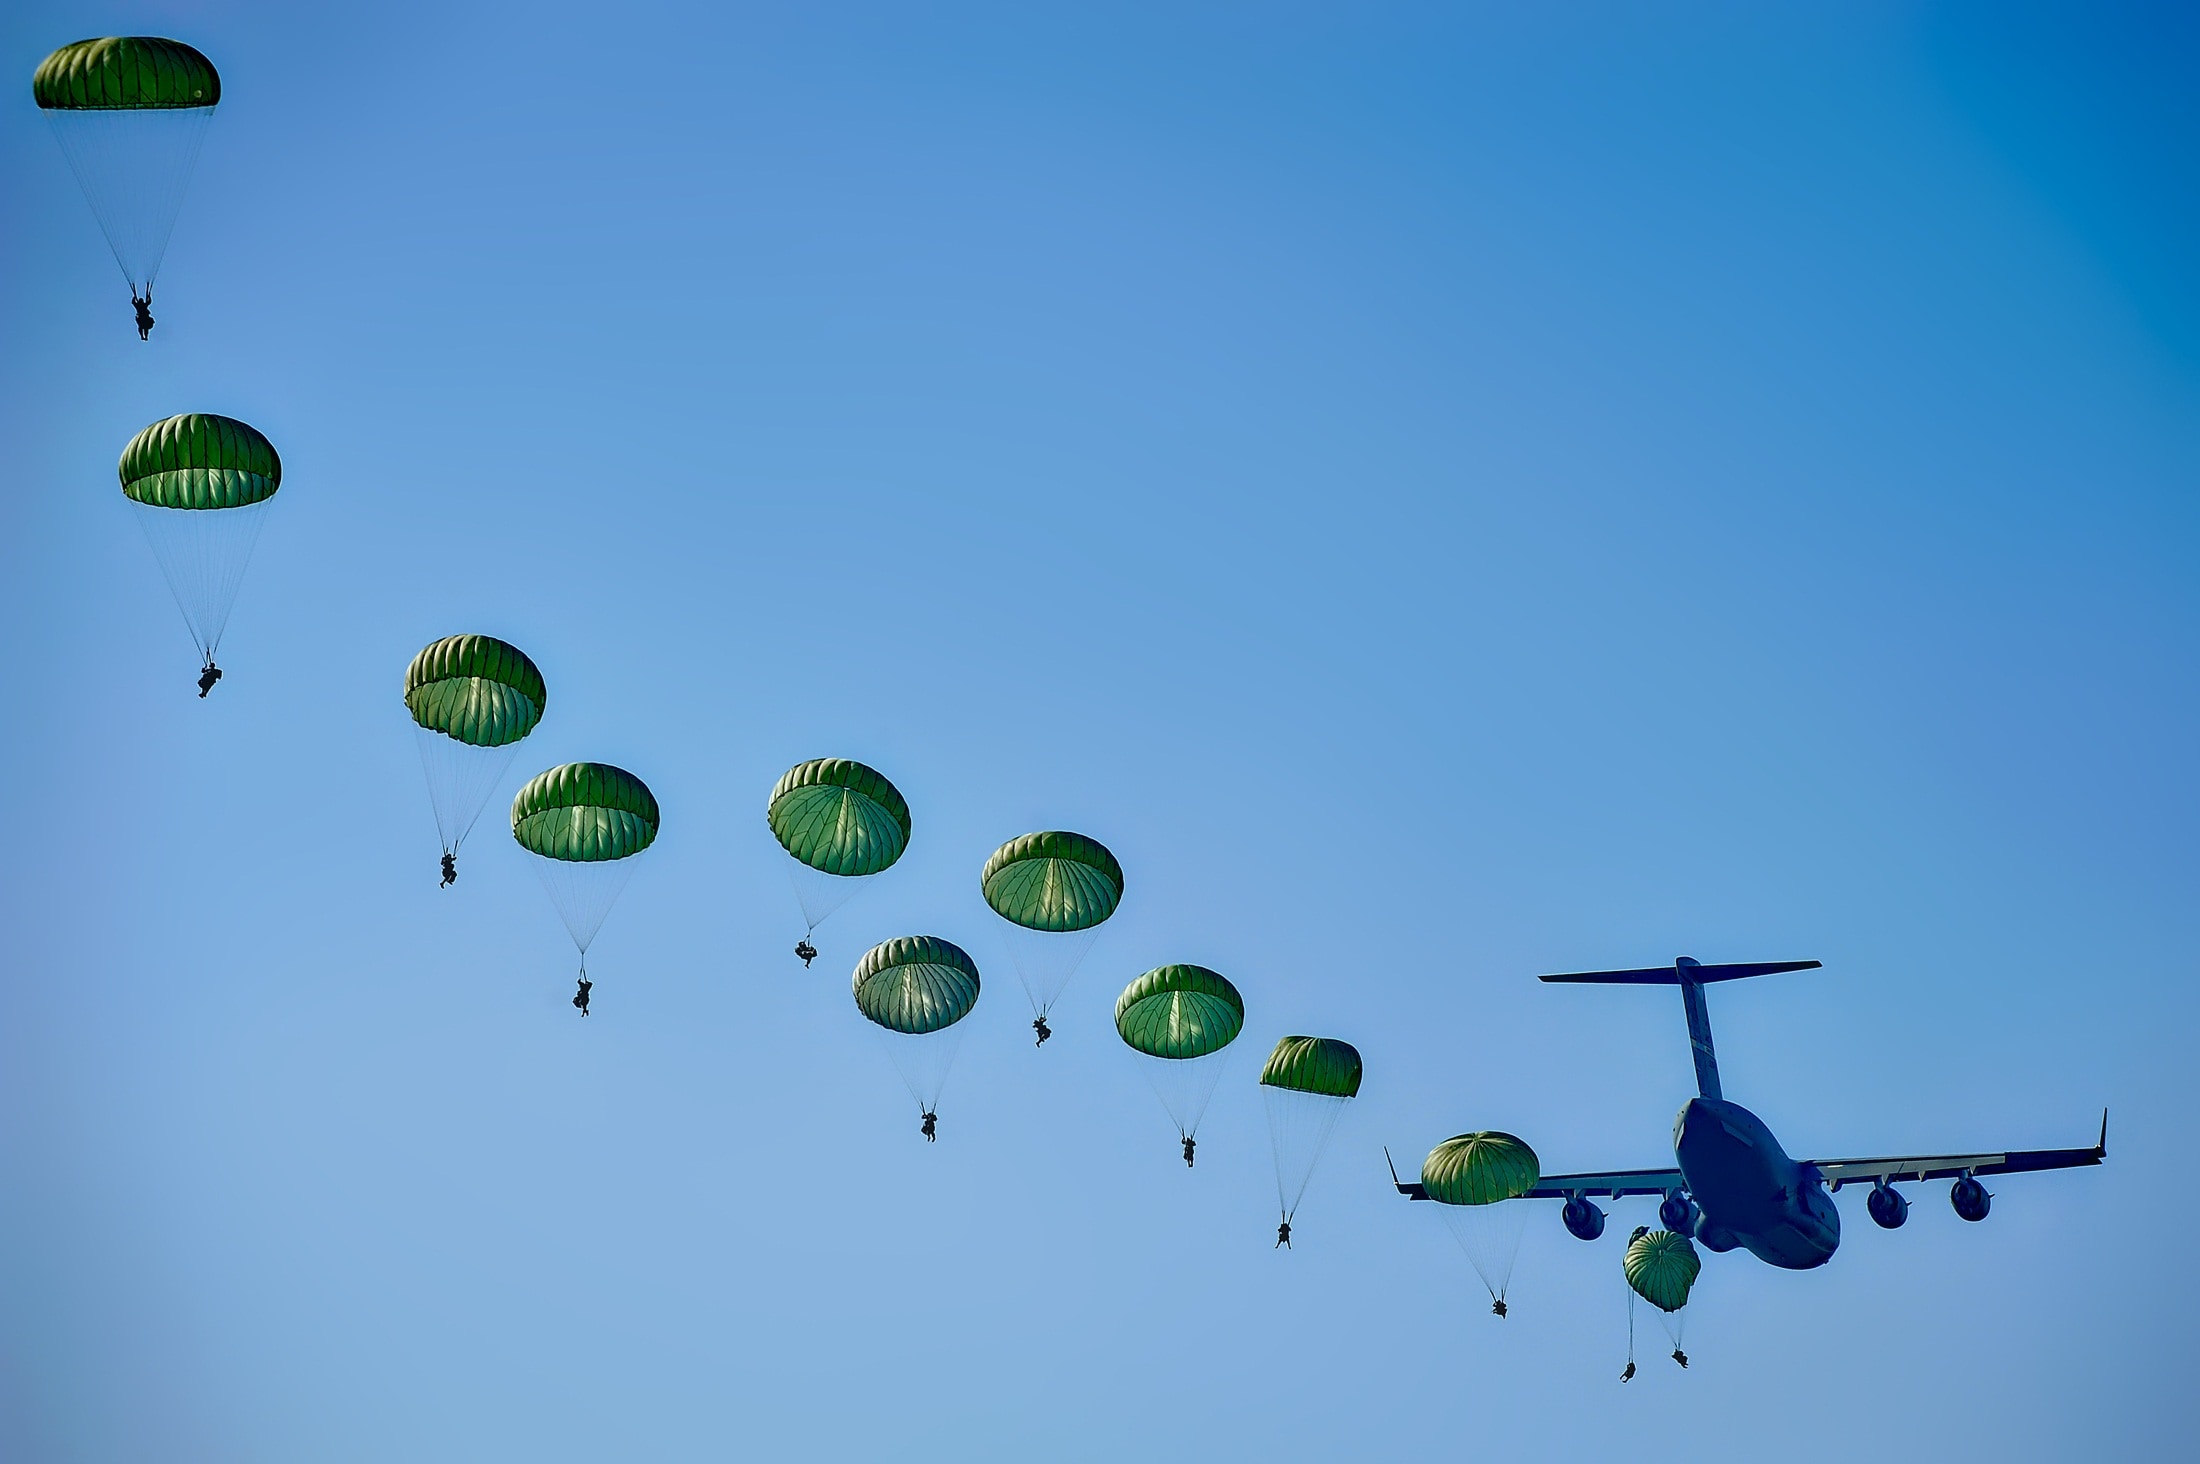 green parachutes and blue airplane